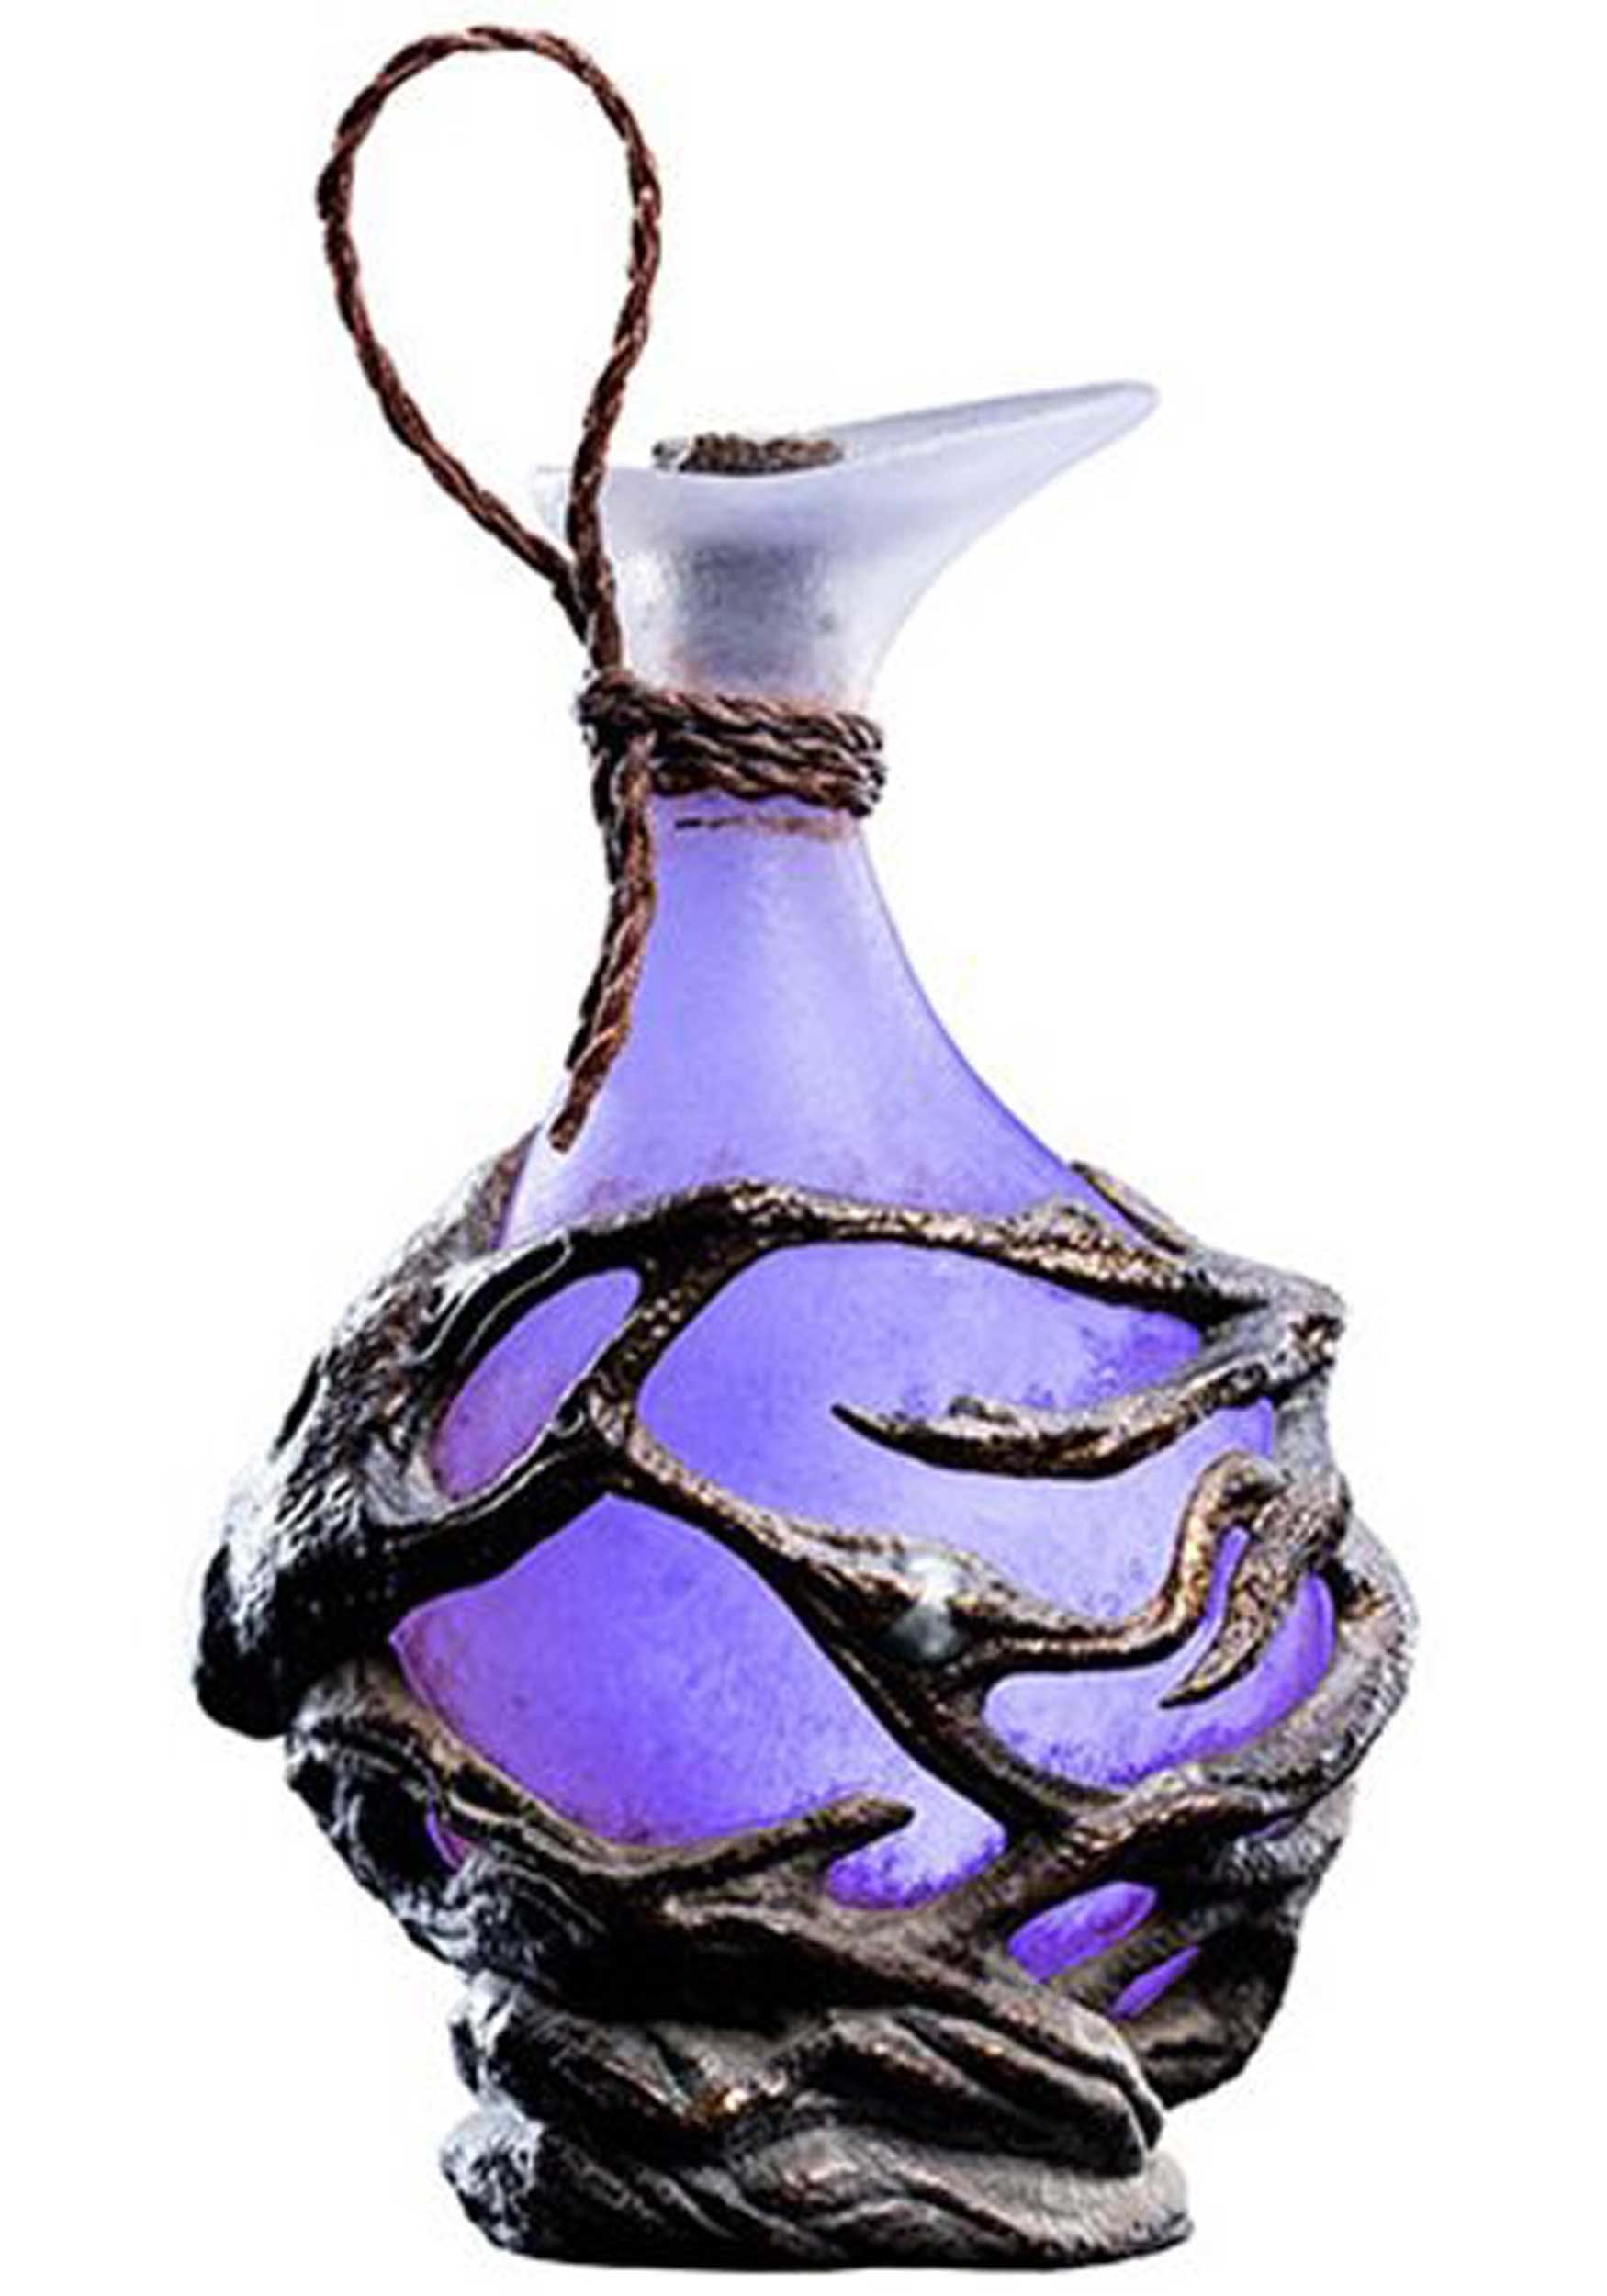 The Dark Crystal: The Age of Resistance Essence Vial